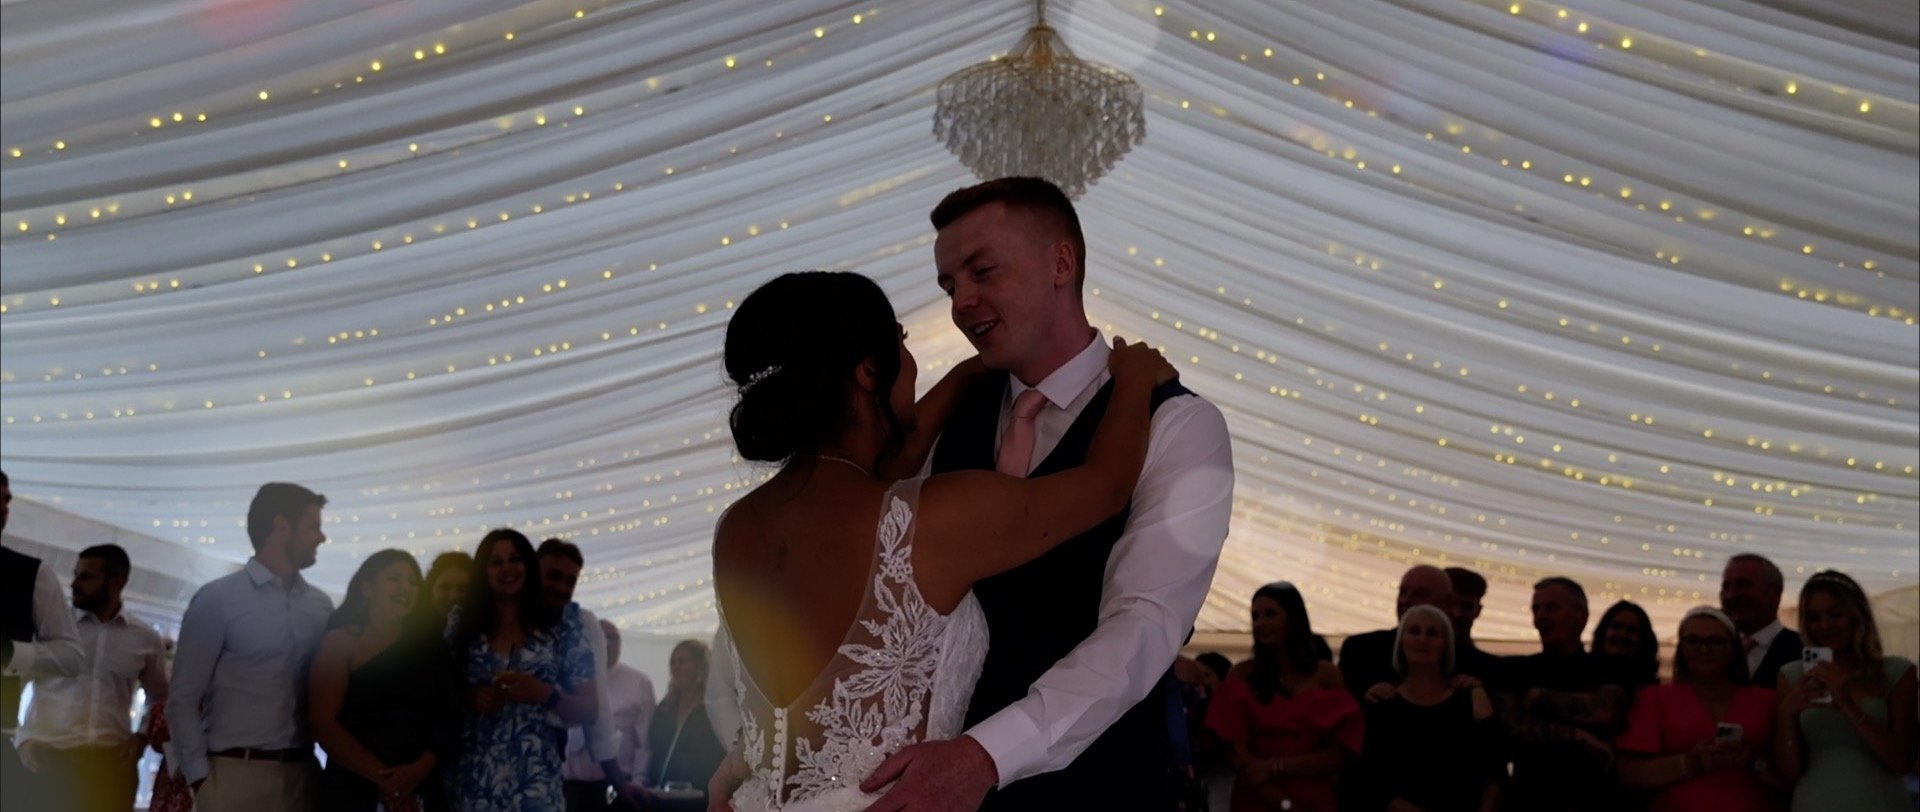 The First Dance - 3 Cheers Media - Quendon Hall - Wedding videos.jpg